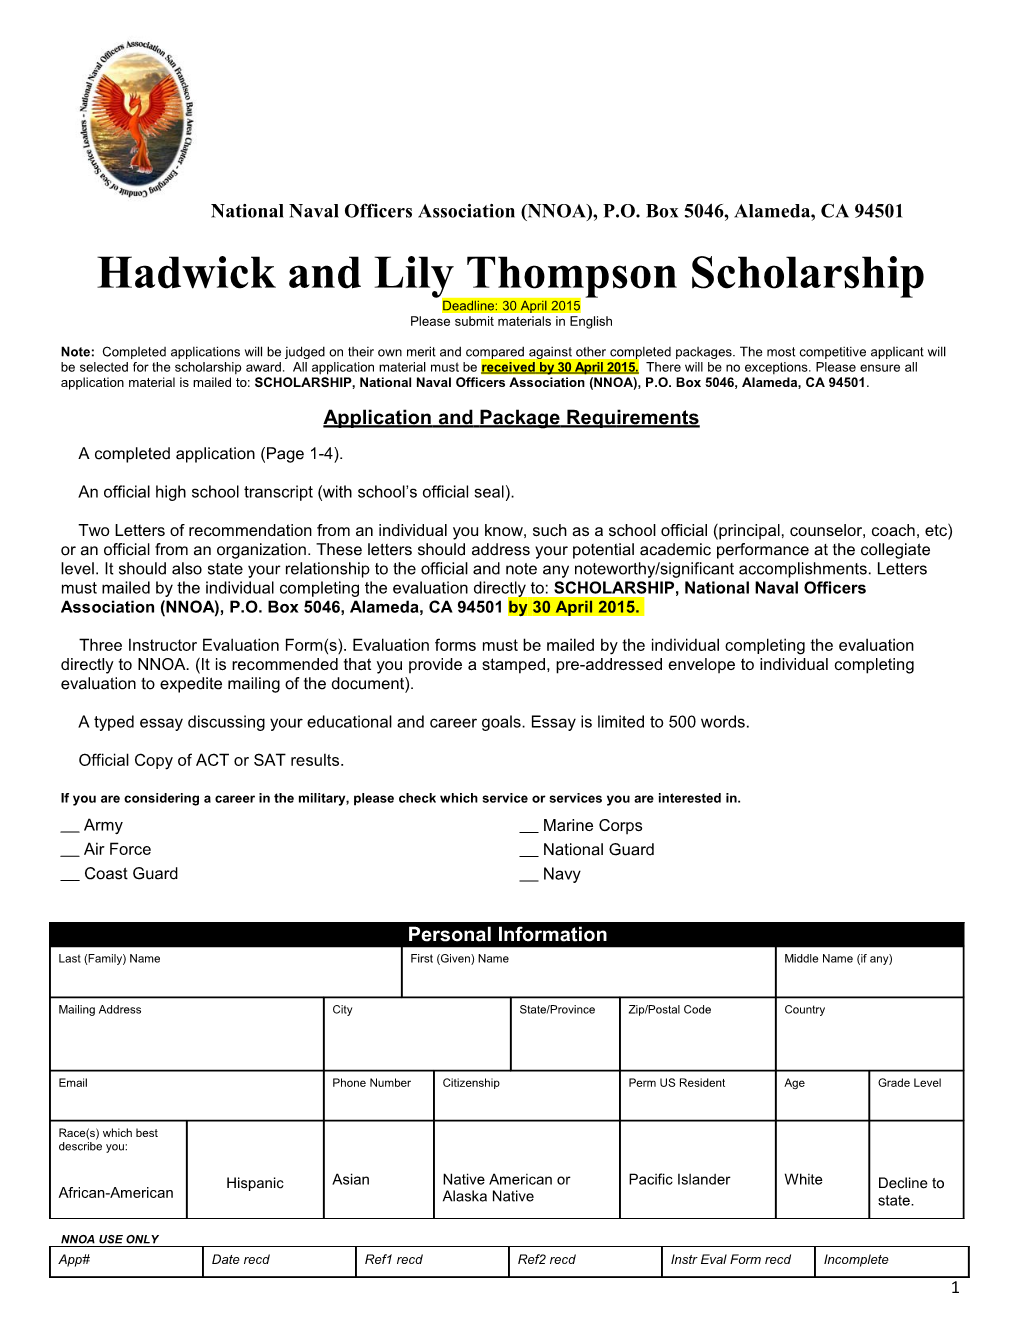 Hadwick and Lily Thompson Scholarship